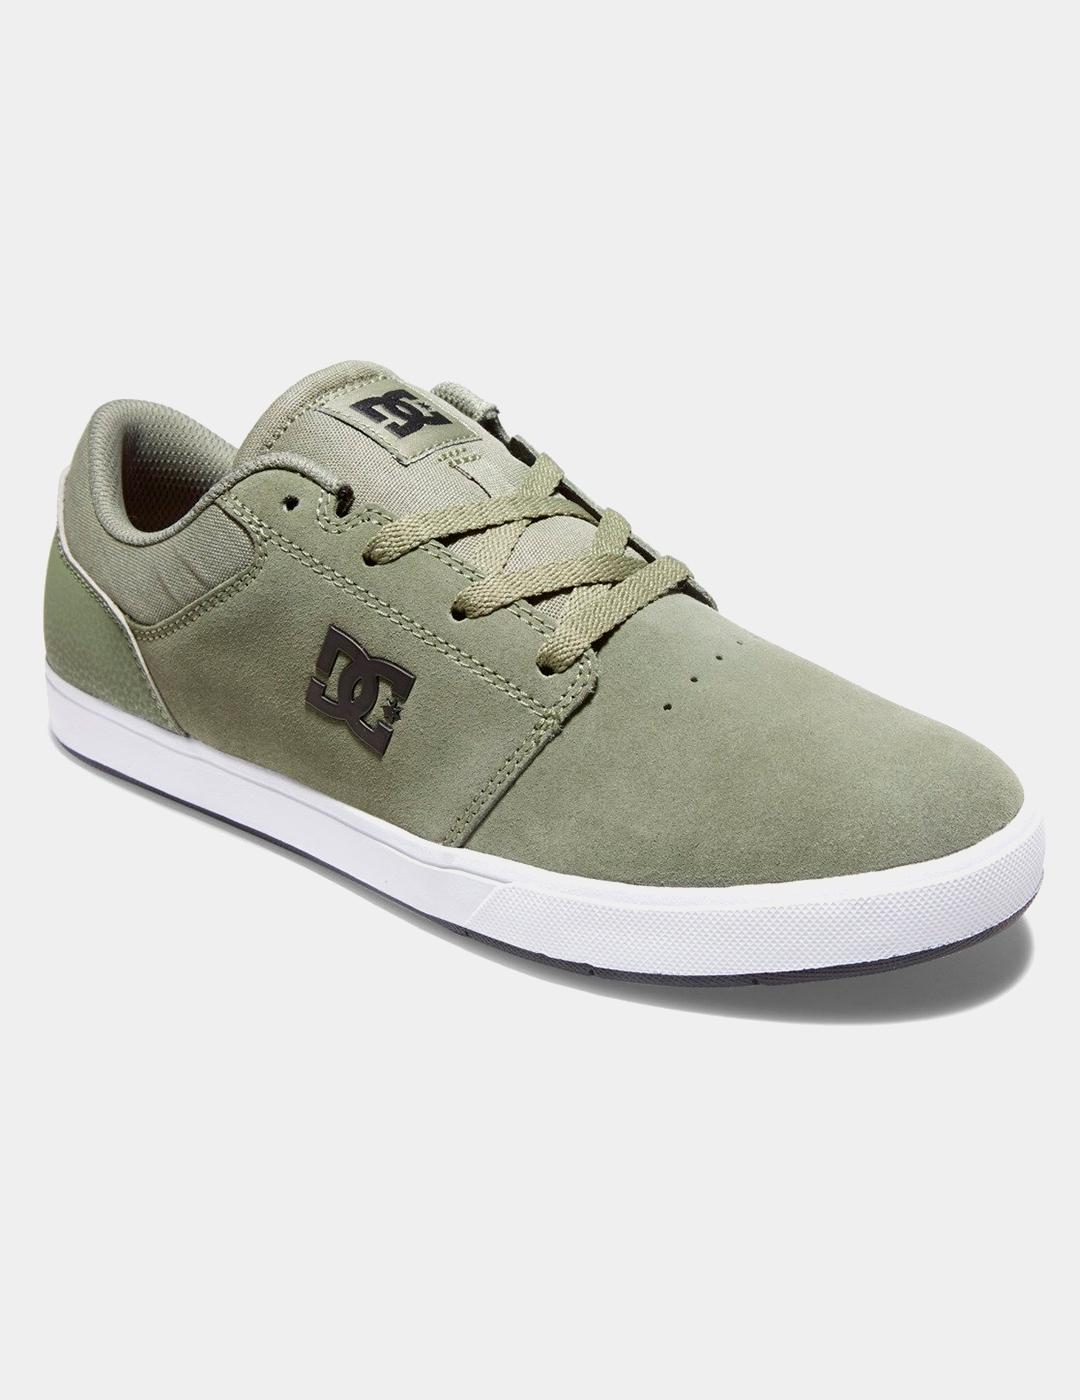 Zapatillas DC SHOES CRISIS 2 - Army/Olive